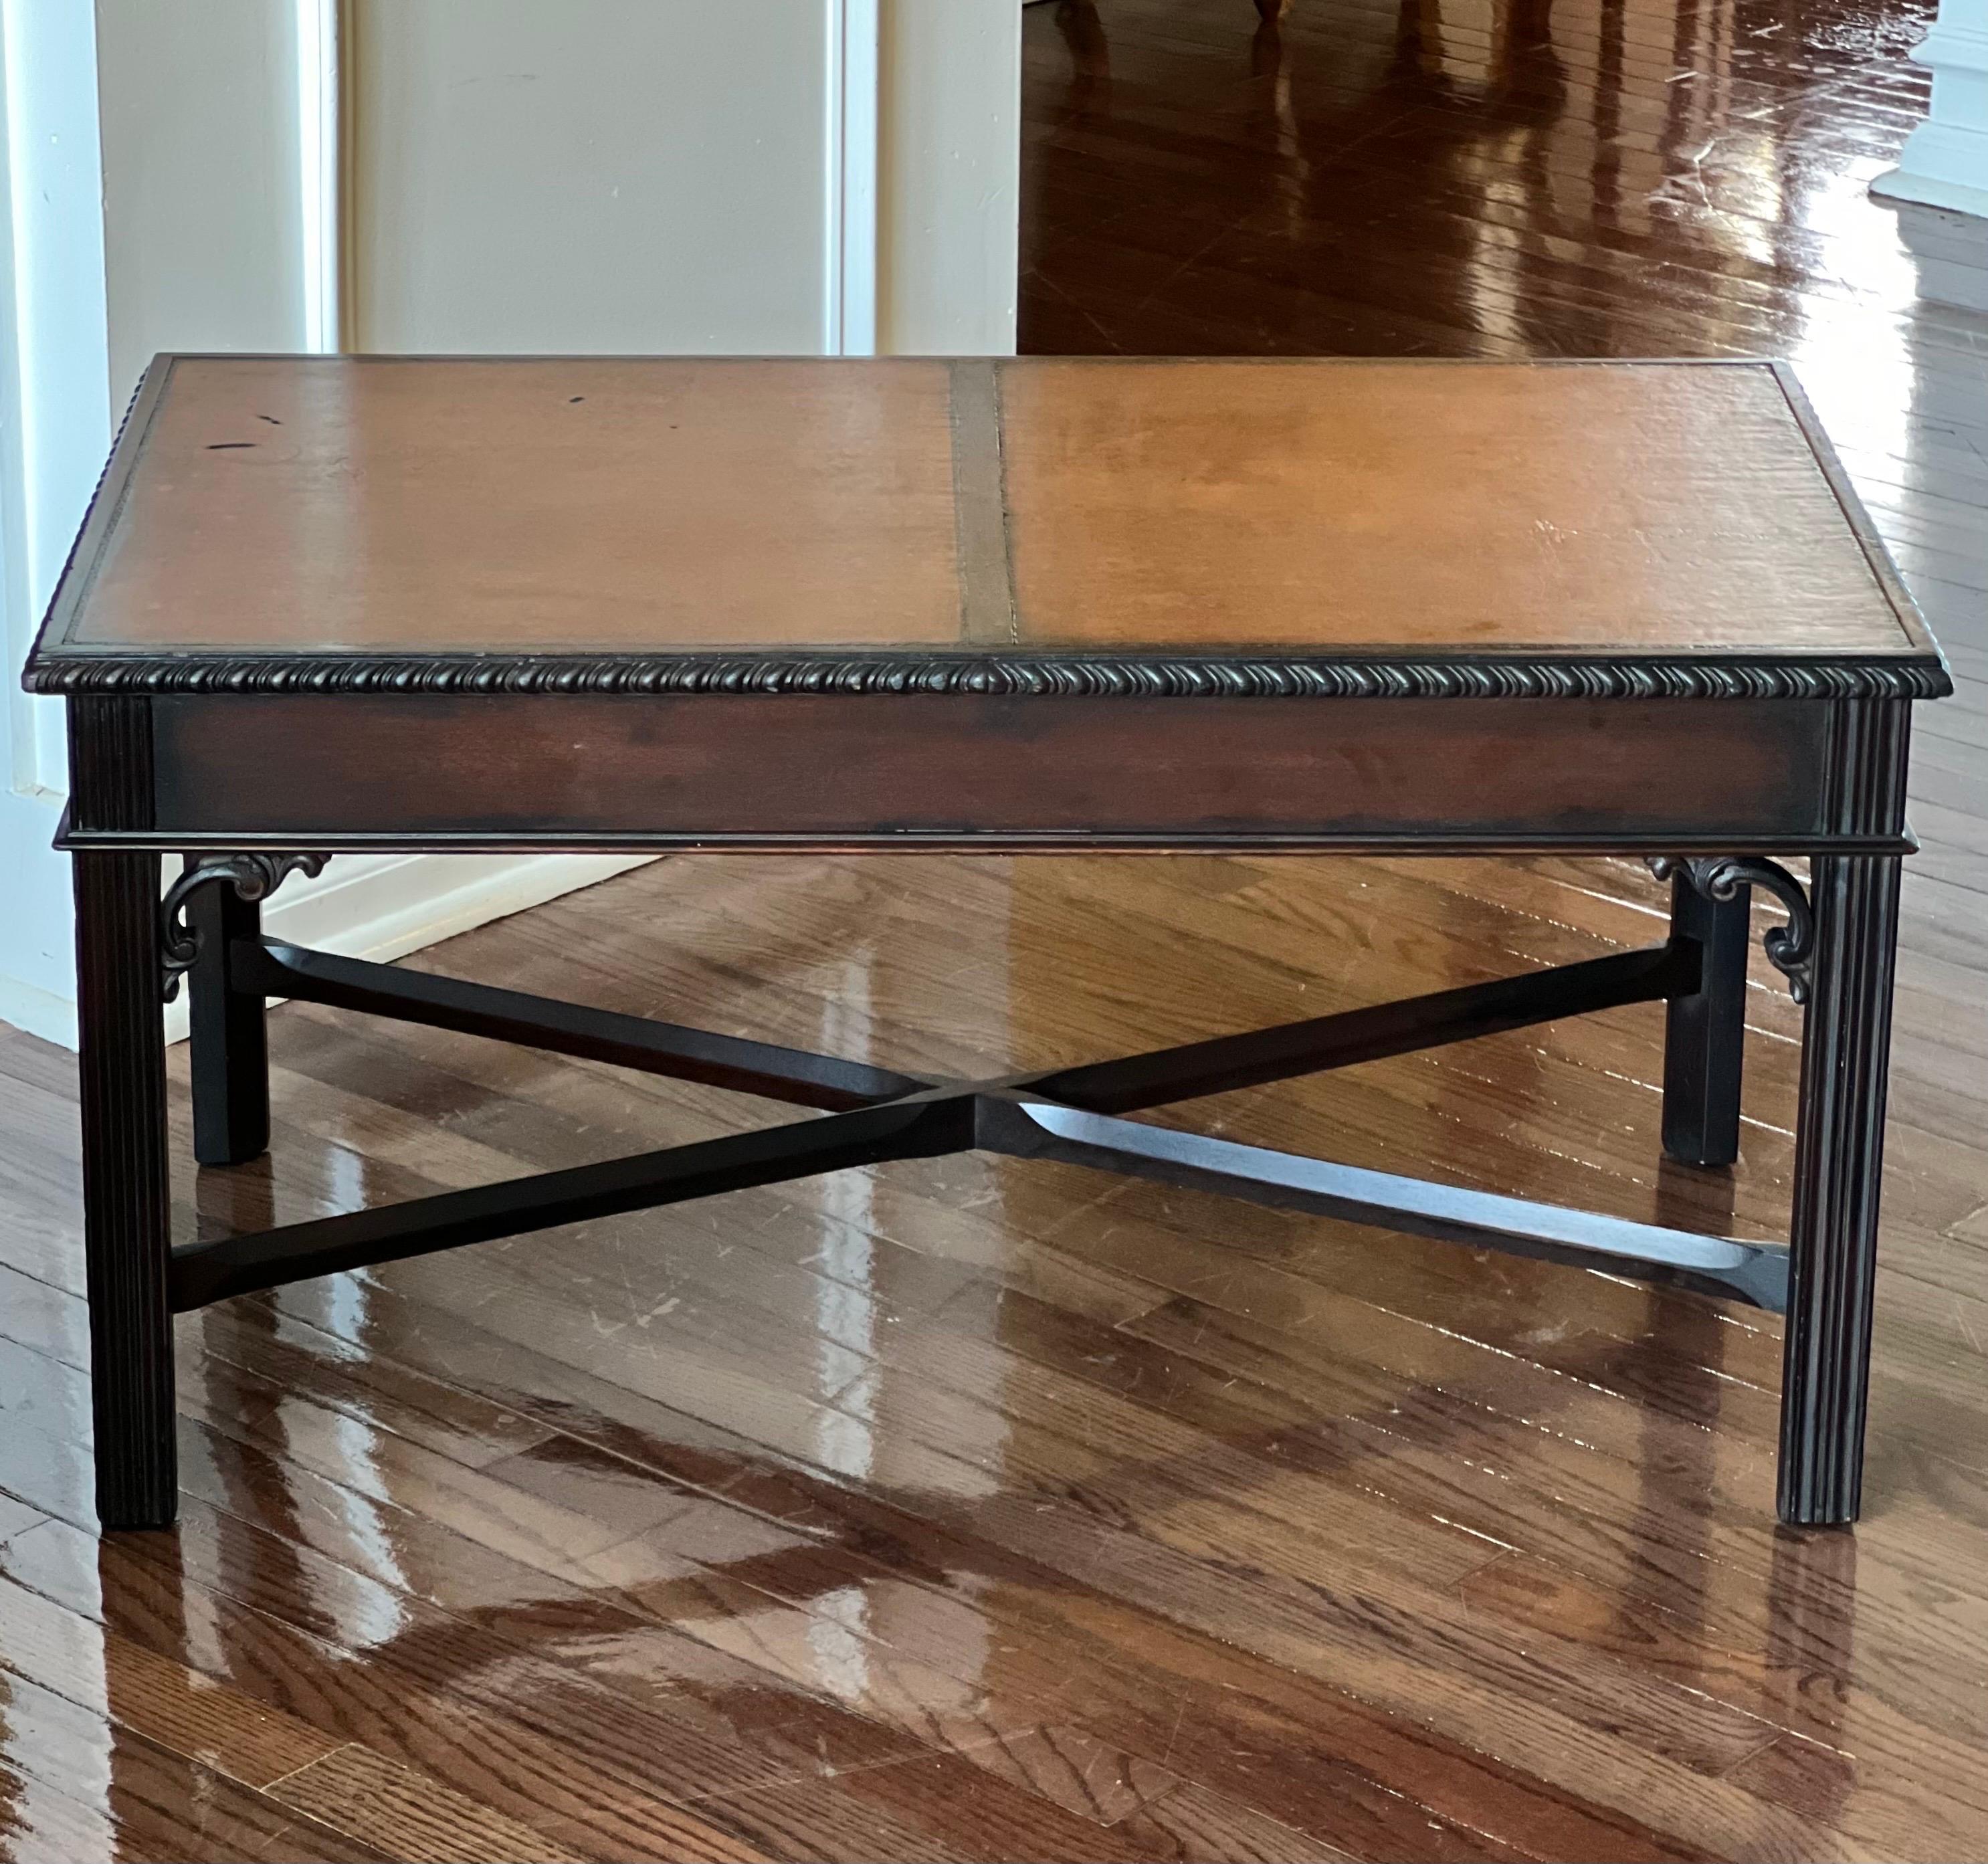 Mahogany Chippendale Style Coffee Table with Leather Top and Drawers by Imperial In Good Condition For Sale In Doylestown, PA